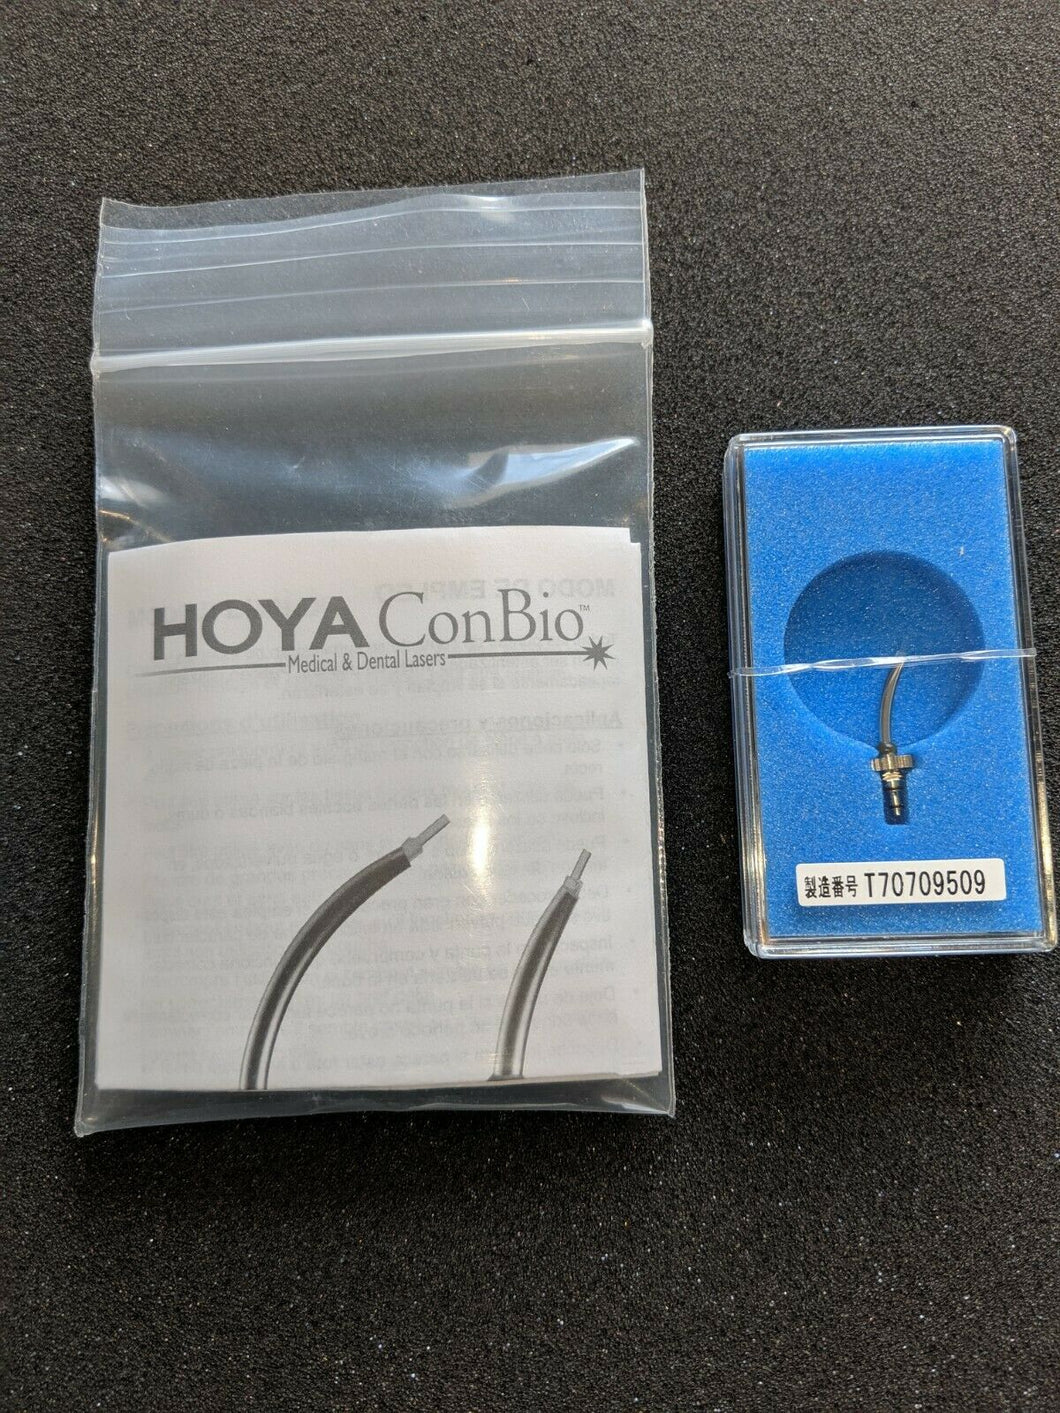 HOYA ConBio Dental Laser Curved Tips for use with Versawave and DeLite